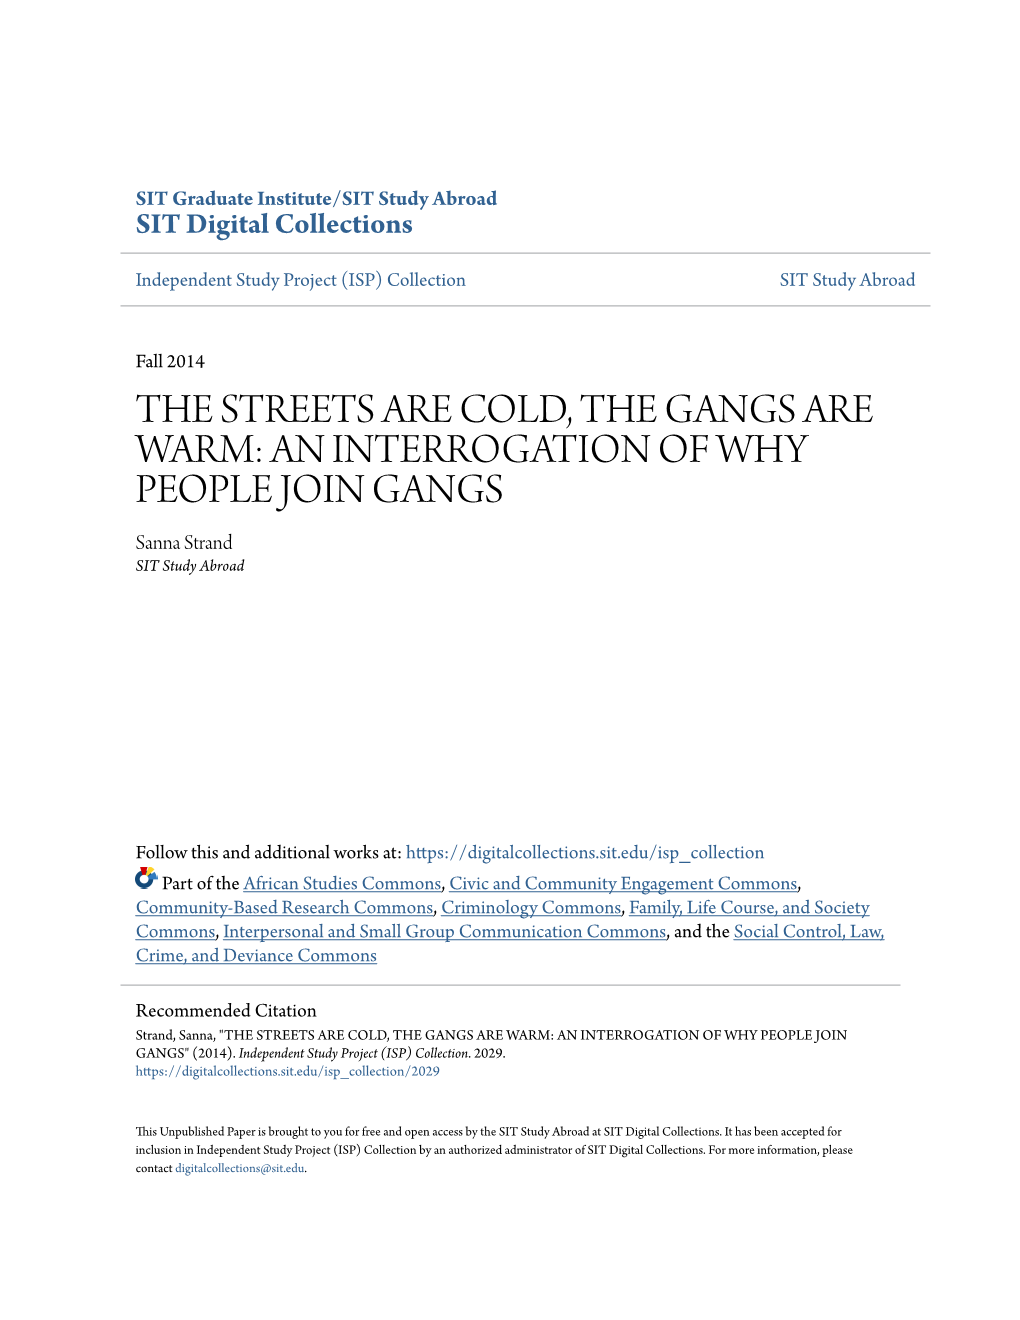 THE STREETS ARE COLD, the GANGS ARE WARM: an INTERROGATION of WHY PEOPLE JOIN GANGS Sanna Strand SIT Study Abroad